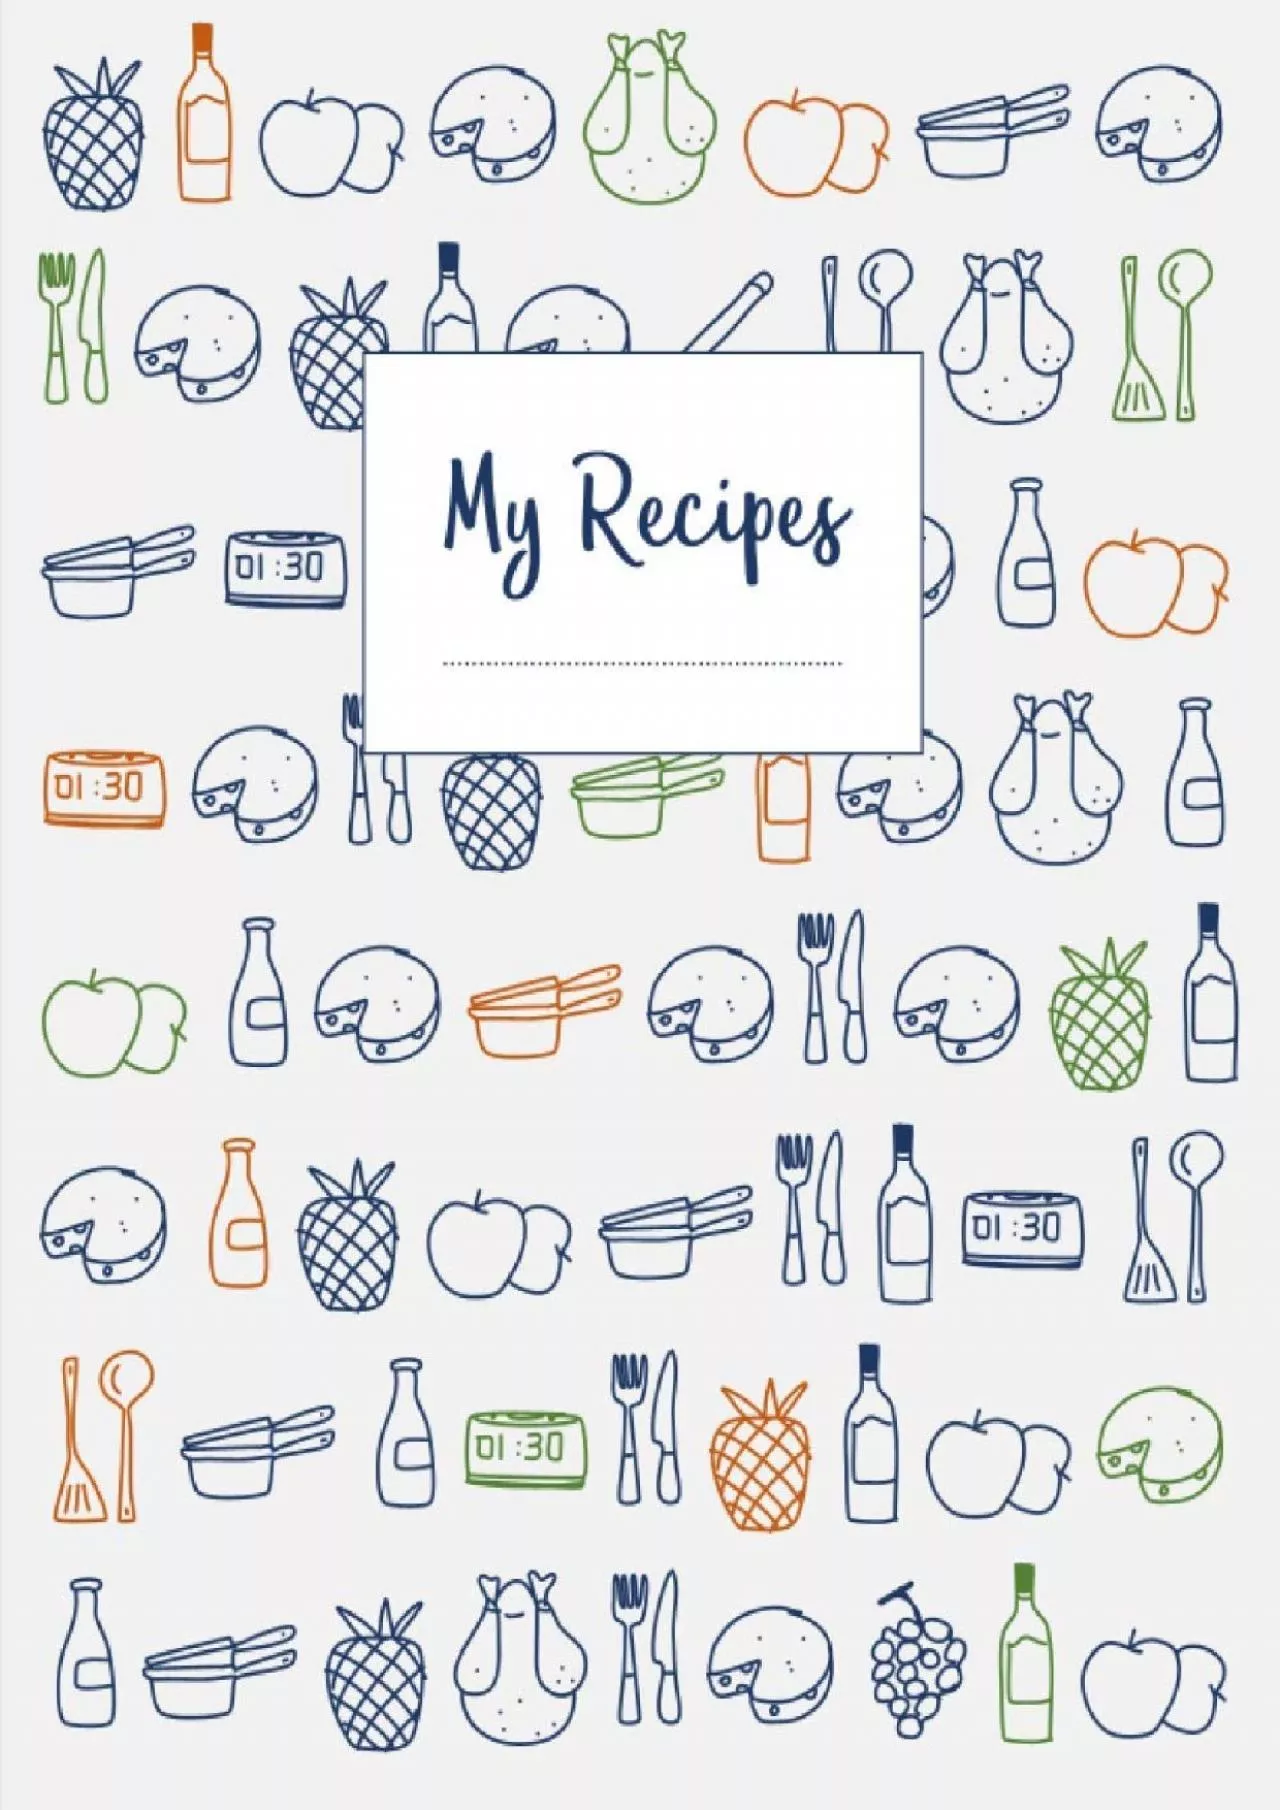 [eBOOK]-My Recipes: The XXL do-it-yourself cookbook to note down your 120 favorite recipes